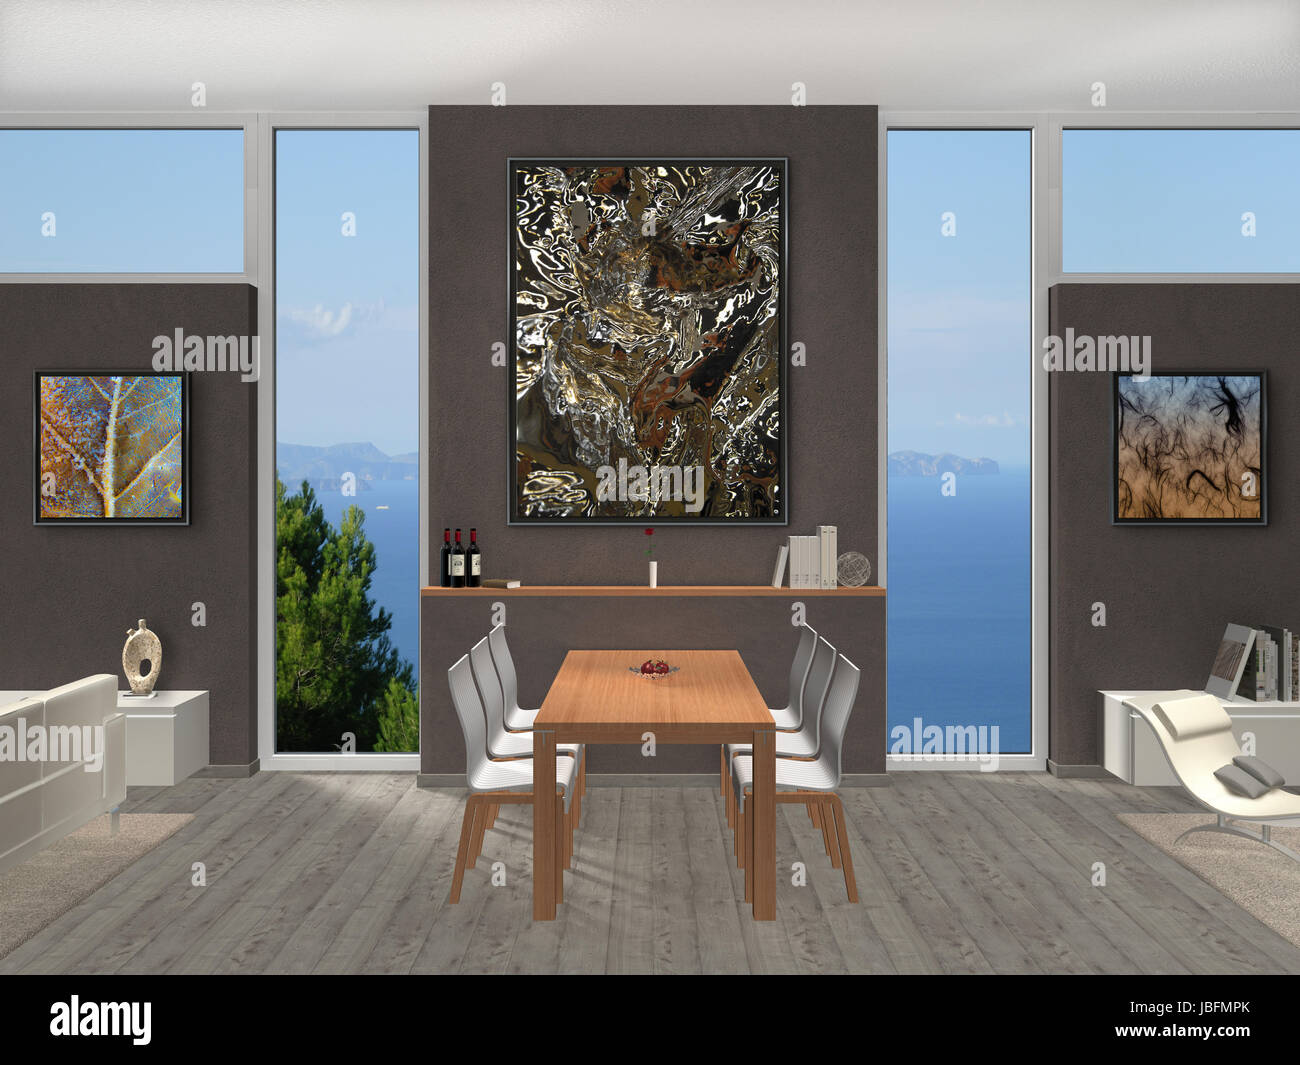 Fictitious Interior Of A Modern Dining Room The Photos In The Frames Stock Photo Alamy